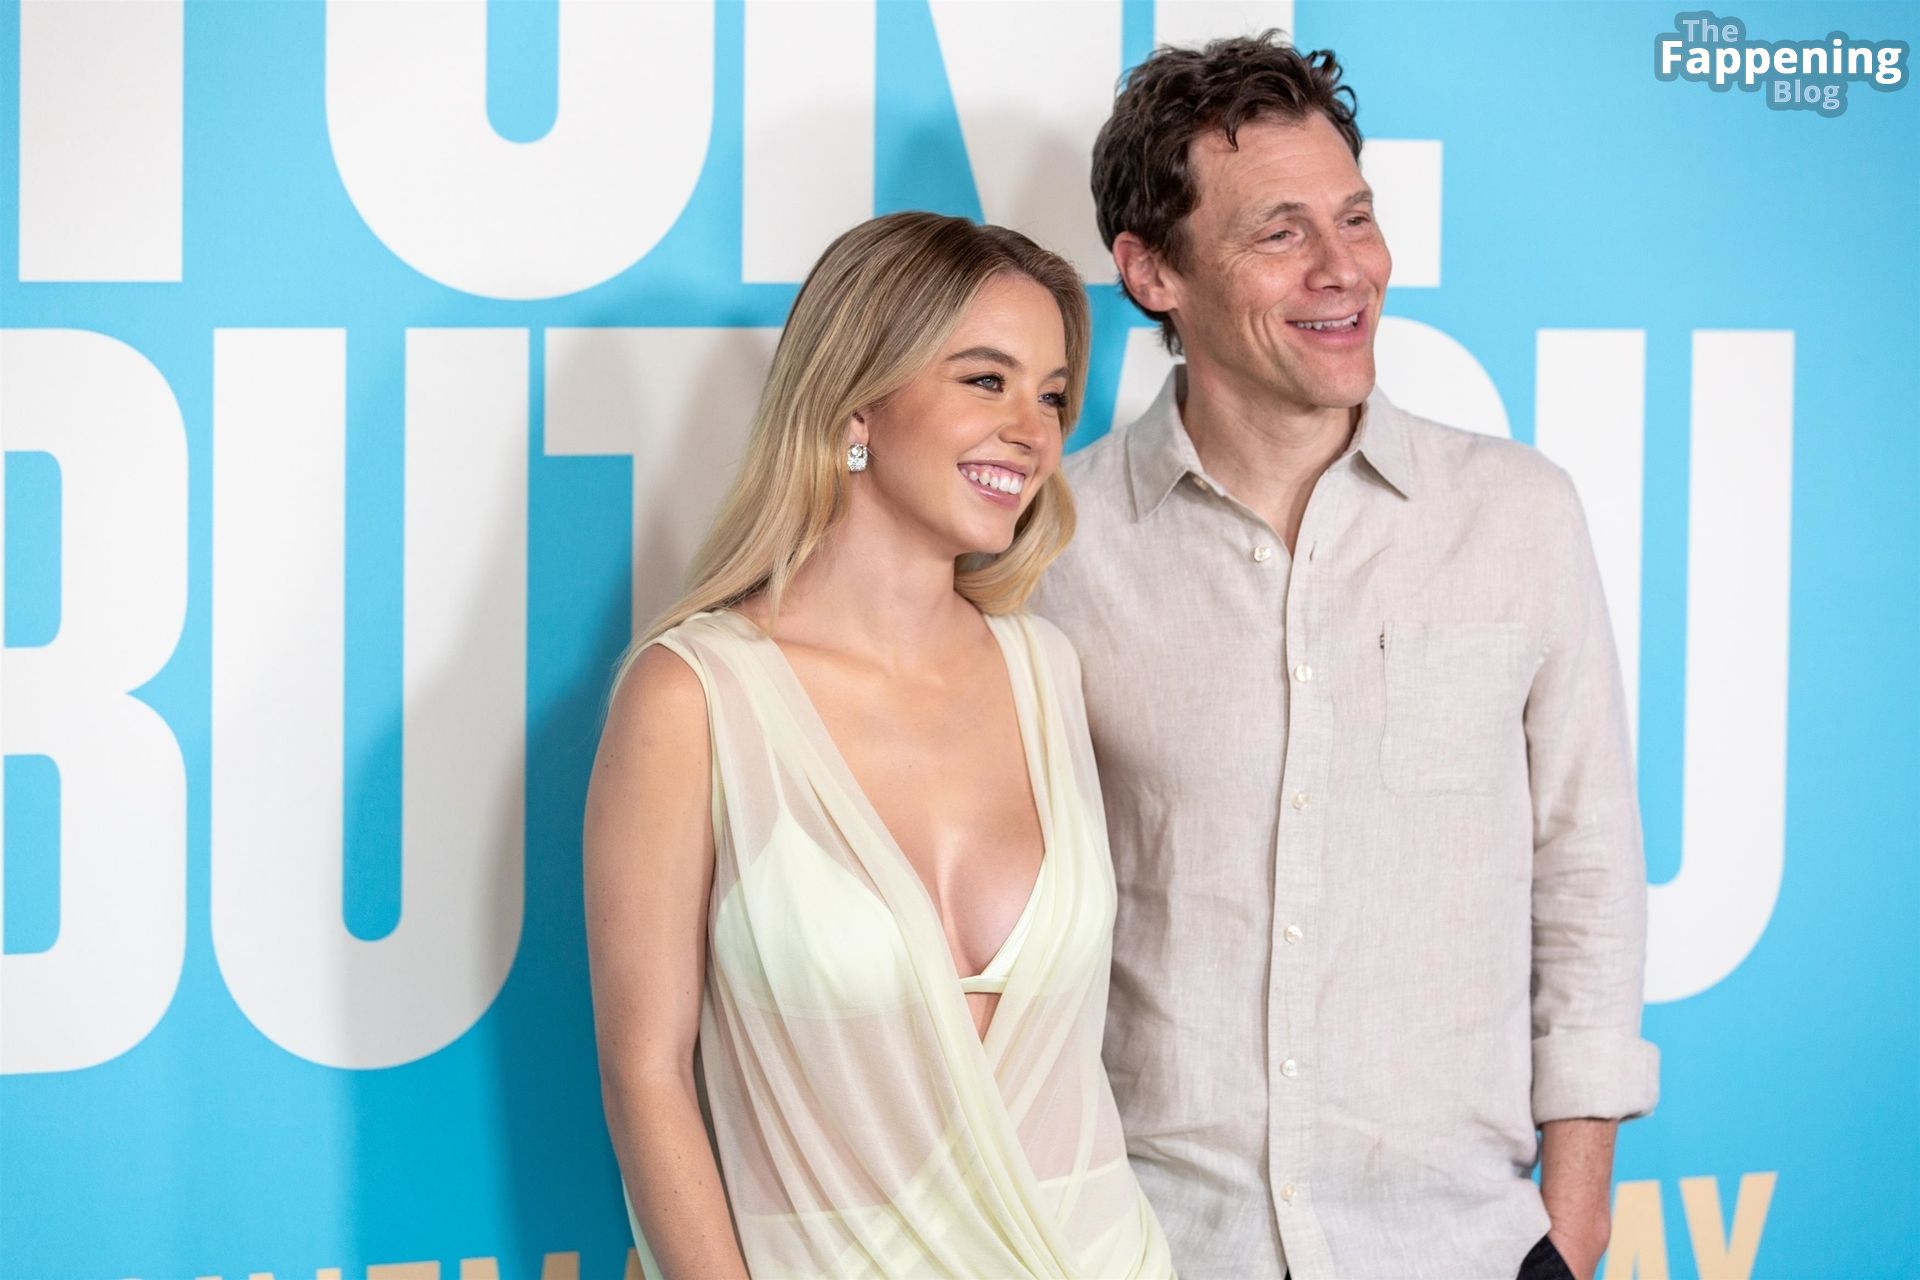 Sydney Sweeney Attends “Anyone But You” Special Australian Screening (150 Photos)